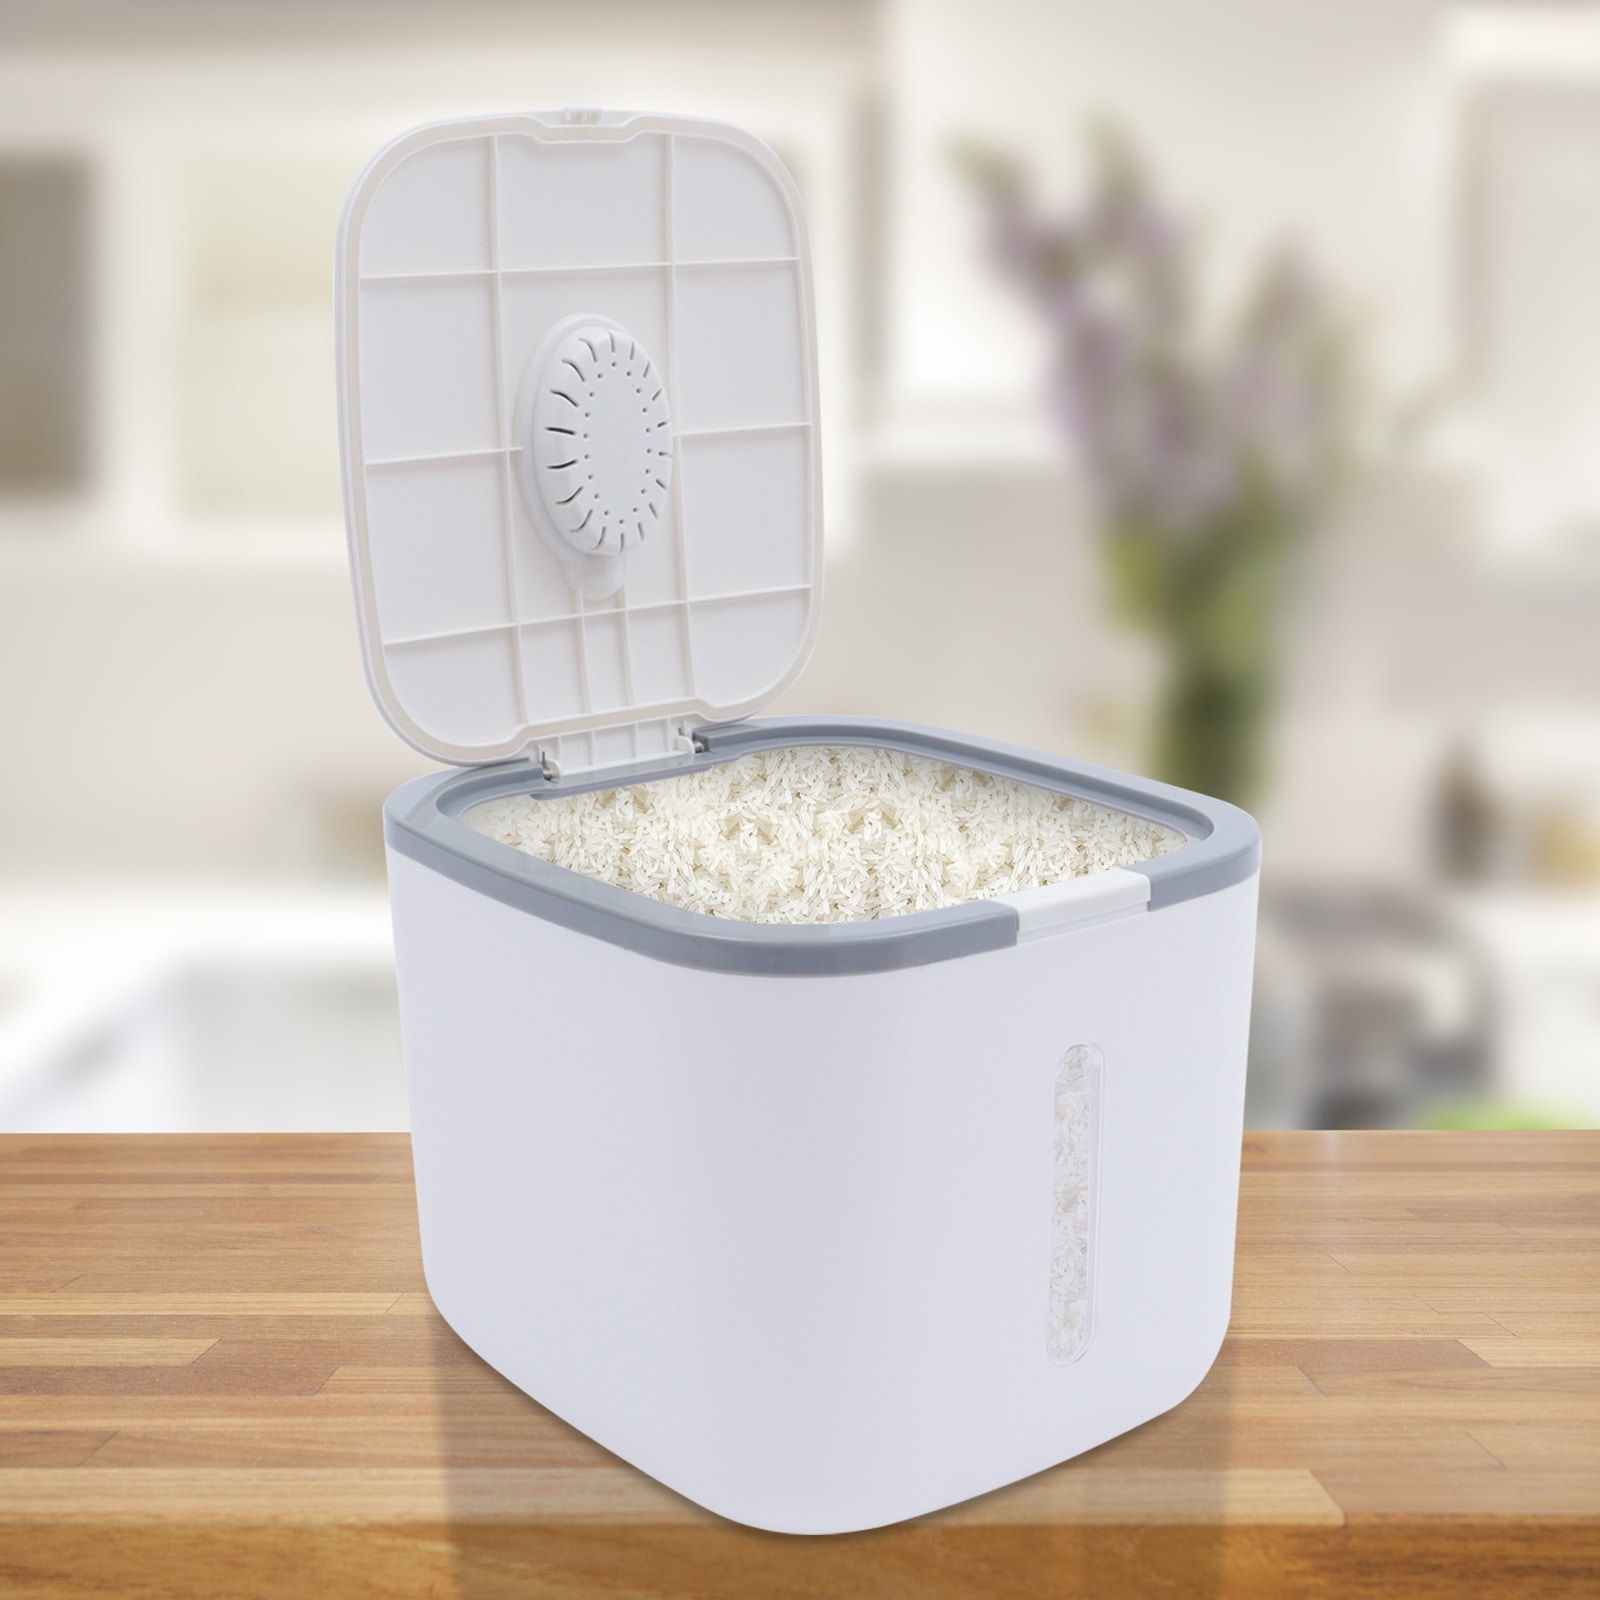 https://ak1.ostkcdn.com/images/products/is/images/direct/5e42e18b6ae9bab76ab2f08e8aab808edd790879/Airtight-Rice-Dispenser-22-Lbs-Automatic-Flip-Cover-Food-Storage-Container.jpg